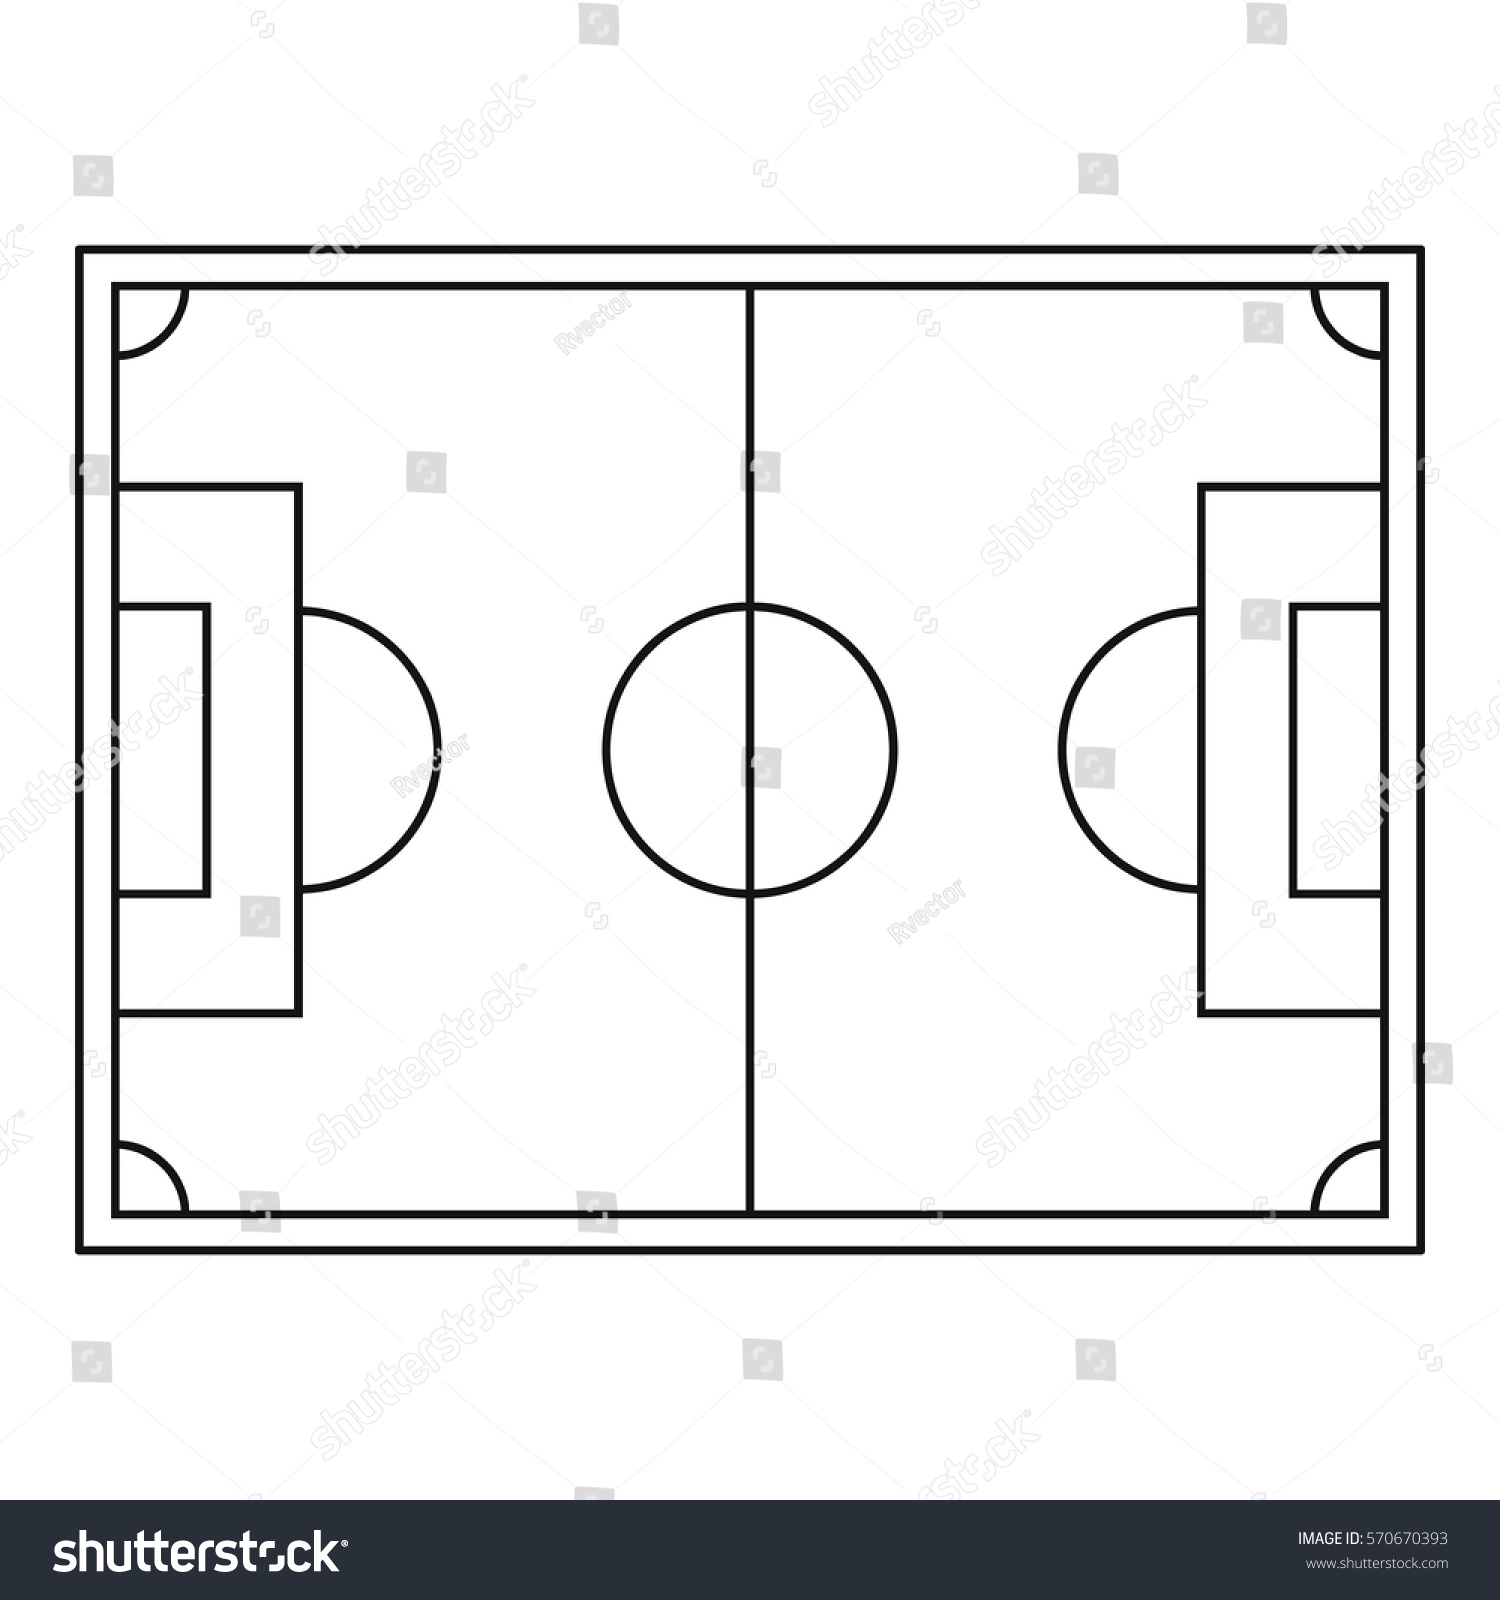 Top View Soccer Field Icon Outline Stock Vector (Royalty Free ...